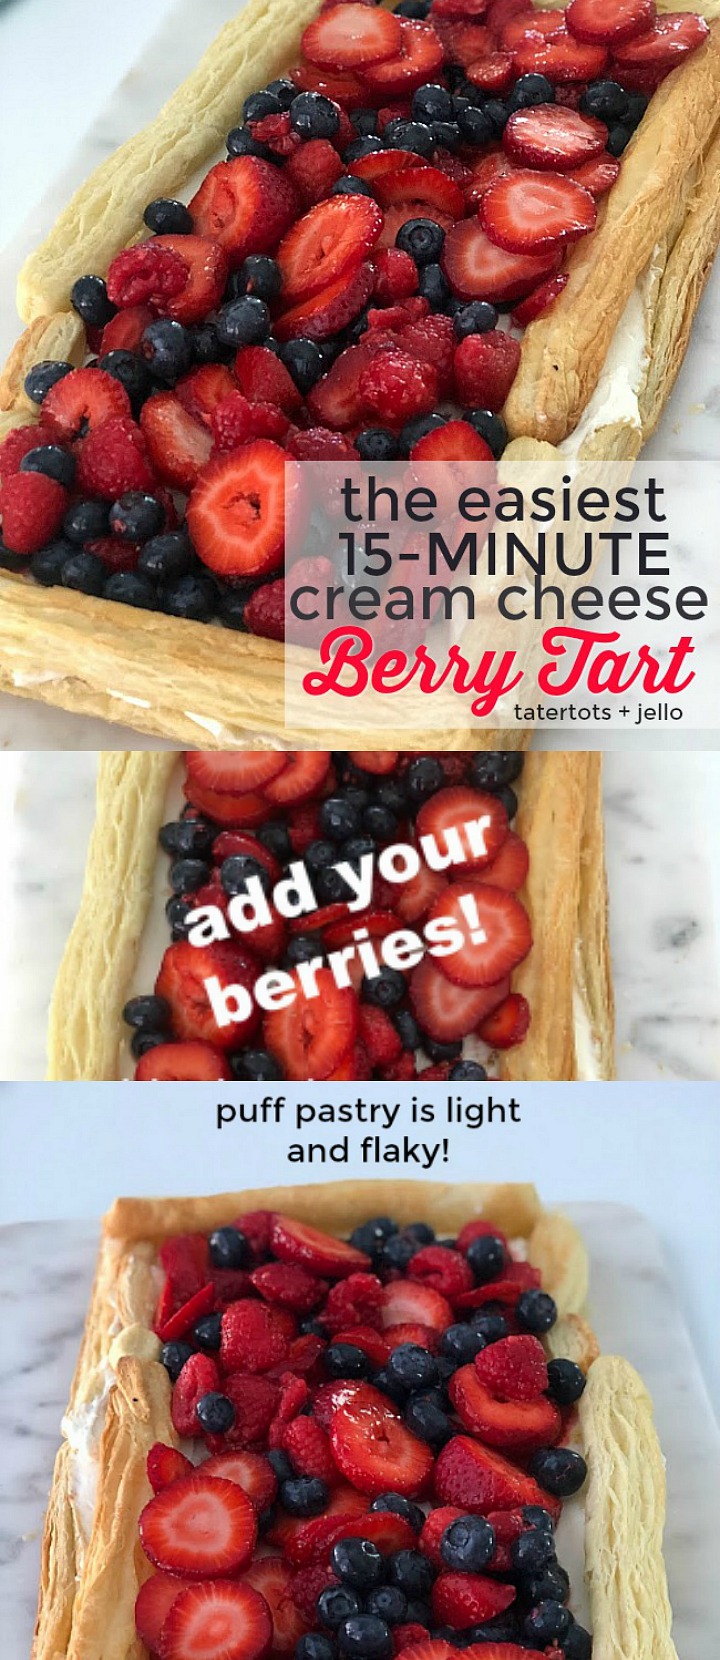 The easiest 15-minute cream cheese berry tart Looking for an easy dessert to whip together this Summer? Make a Berry Tart with puff pastry, fresh berries and a light and fluffy cheesecake filling. It's light, fresh and oh so good! 